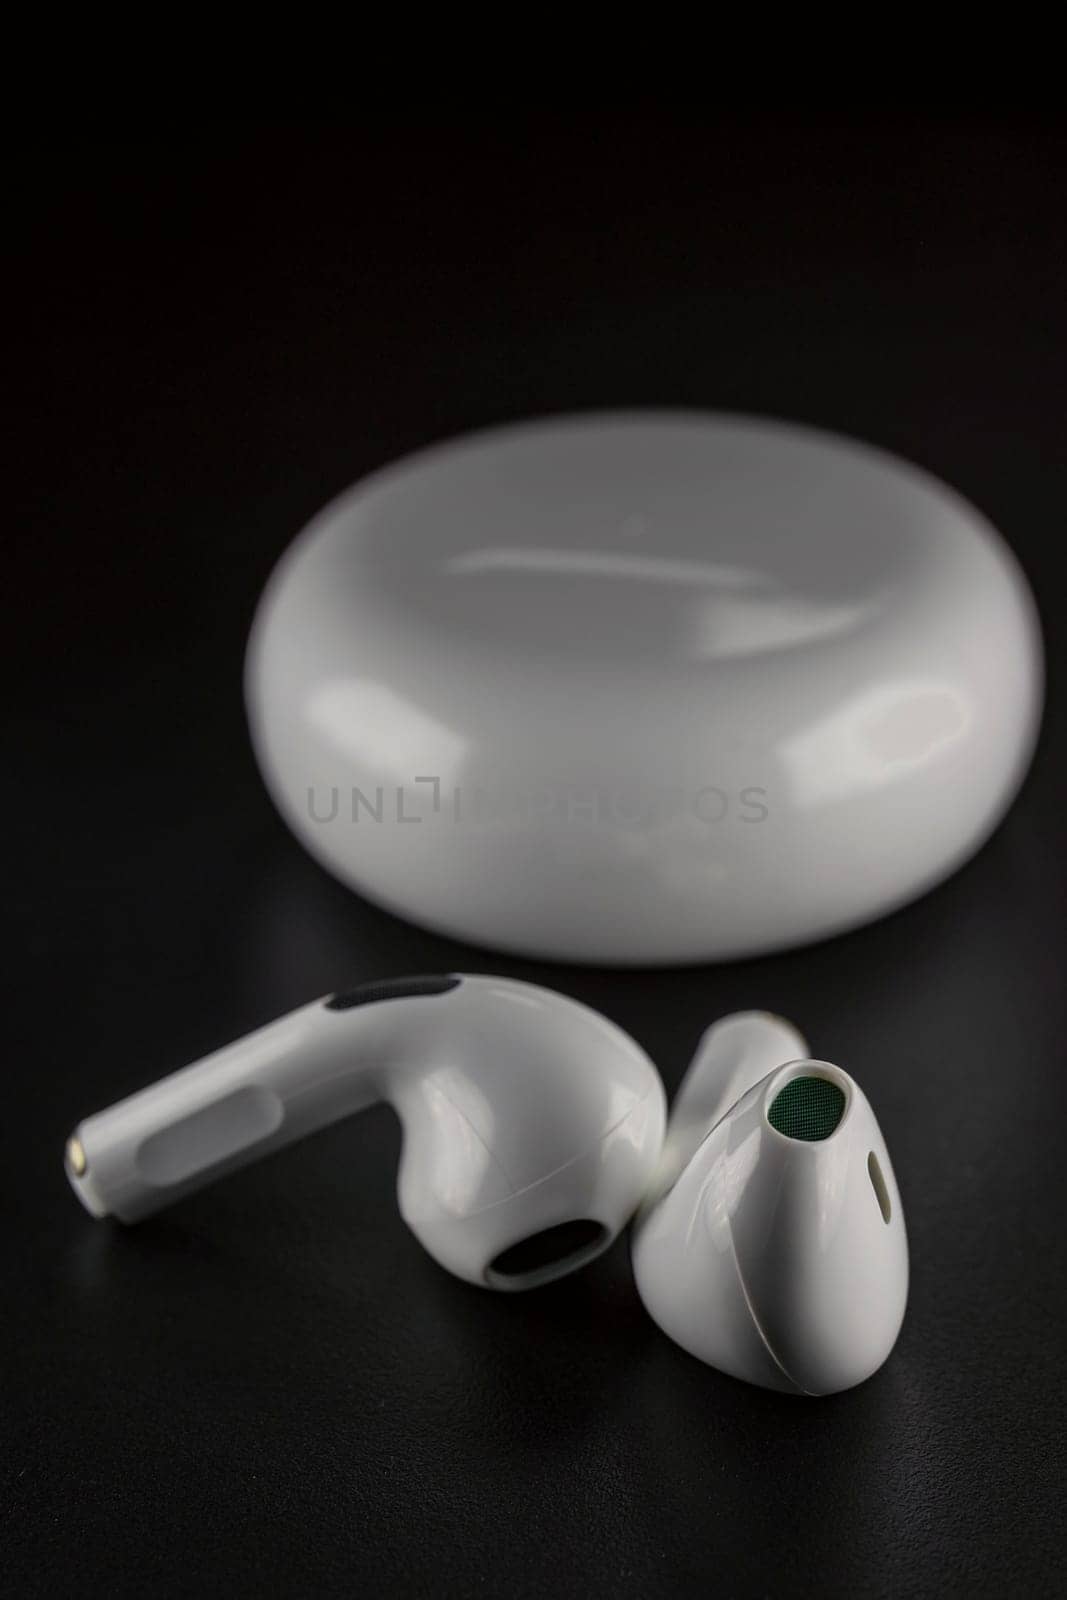 ROSTOV-ON-DON, RUSSIA - APRIL 28, 2018: Apple AirPods wireless Bluetooth headphones and charging case for Apple iPhone. New Apple Earpods Airpods in box.